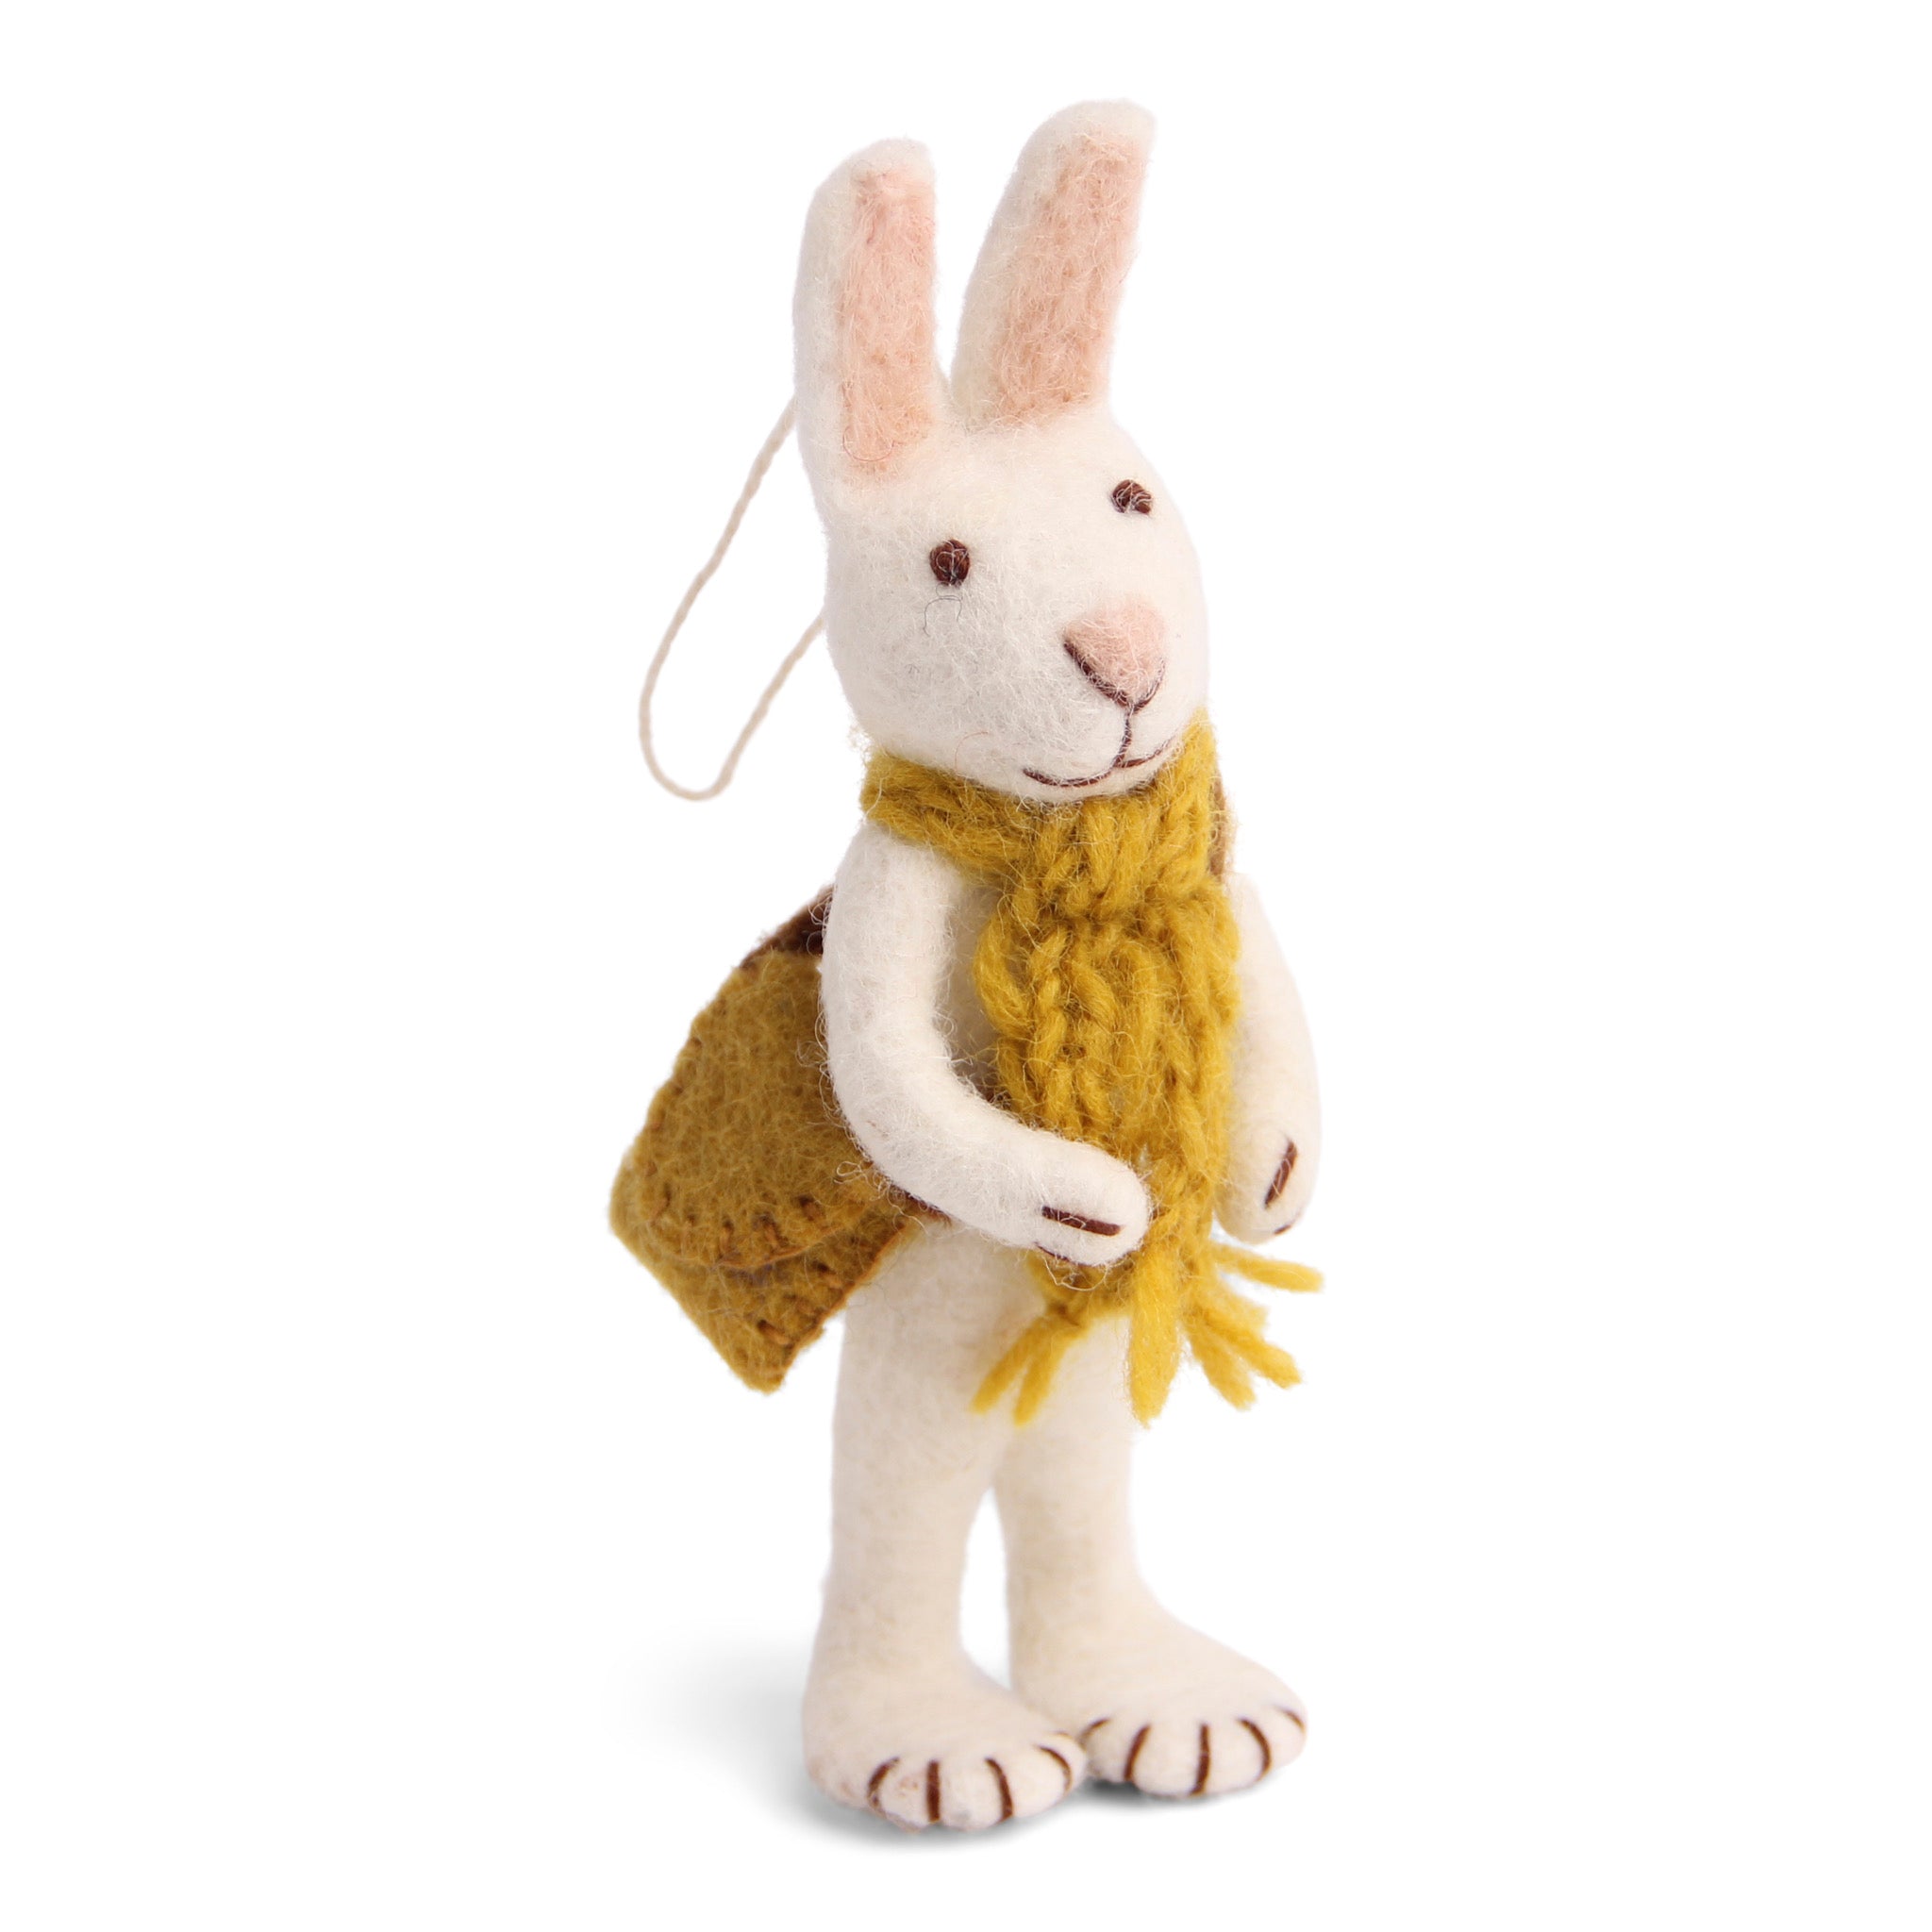 En Gry & Sif white sanding rabbit with knitted ochre scarf and bag